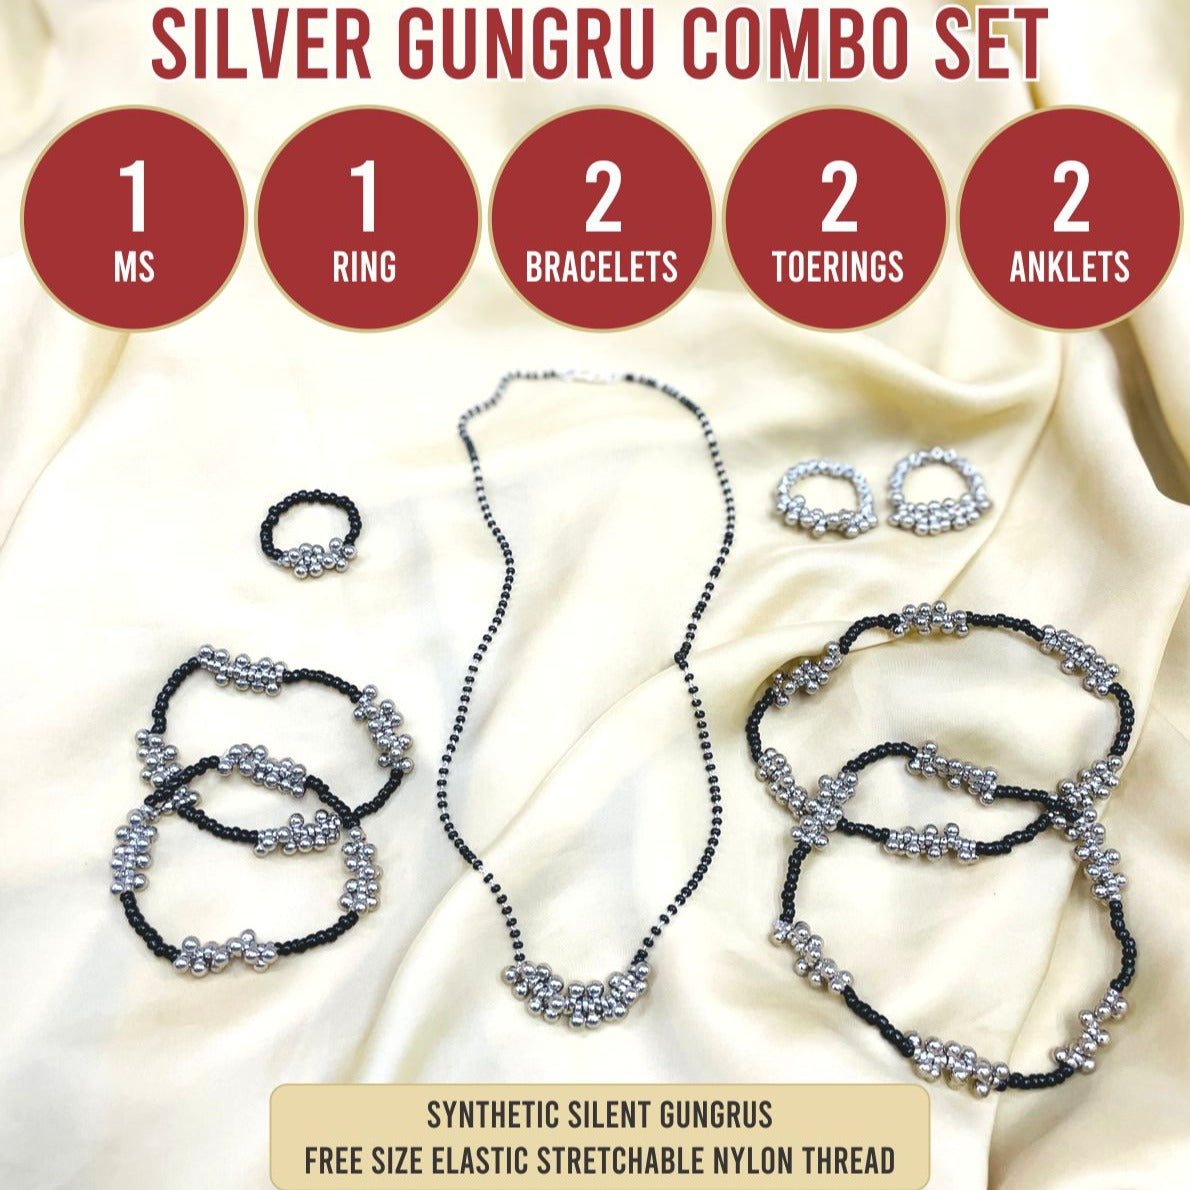 Astonishing Silver Plated Ghungroo Anklet Toe Rings Combo - Abdesignsjewellery